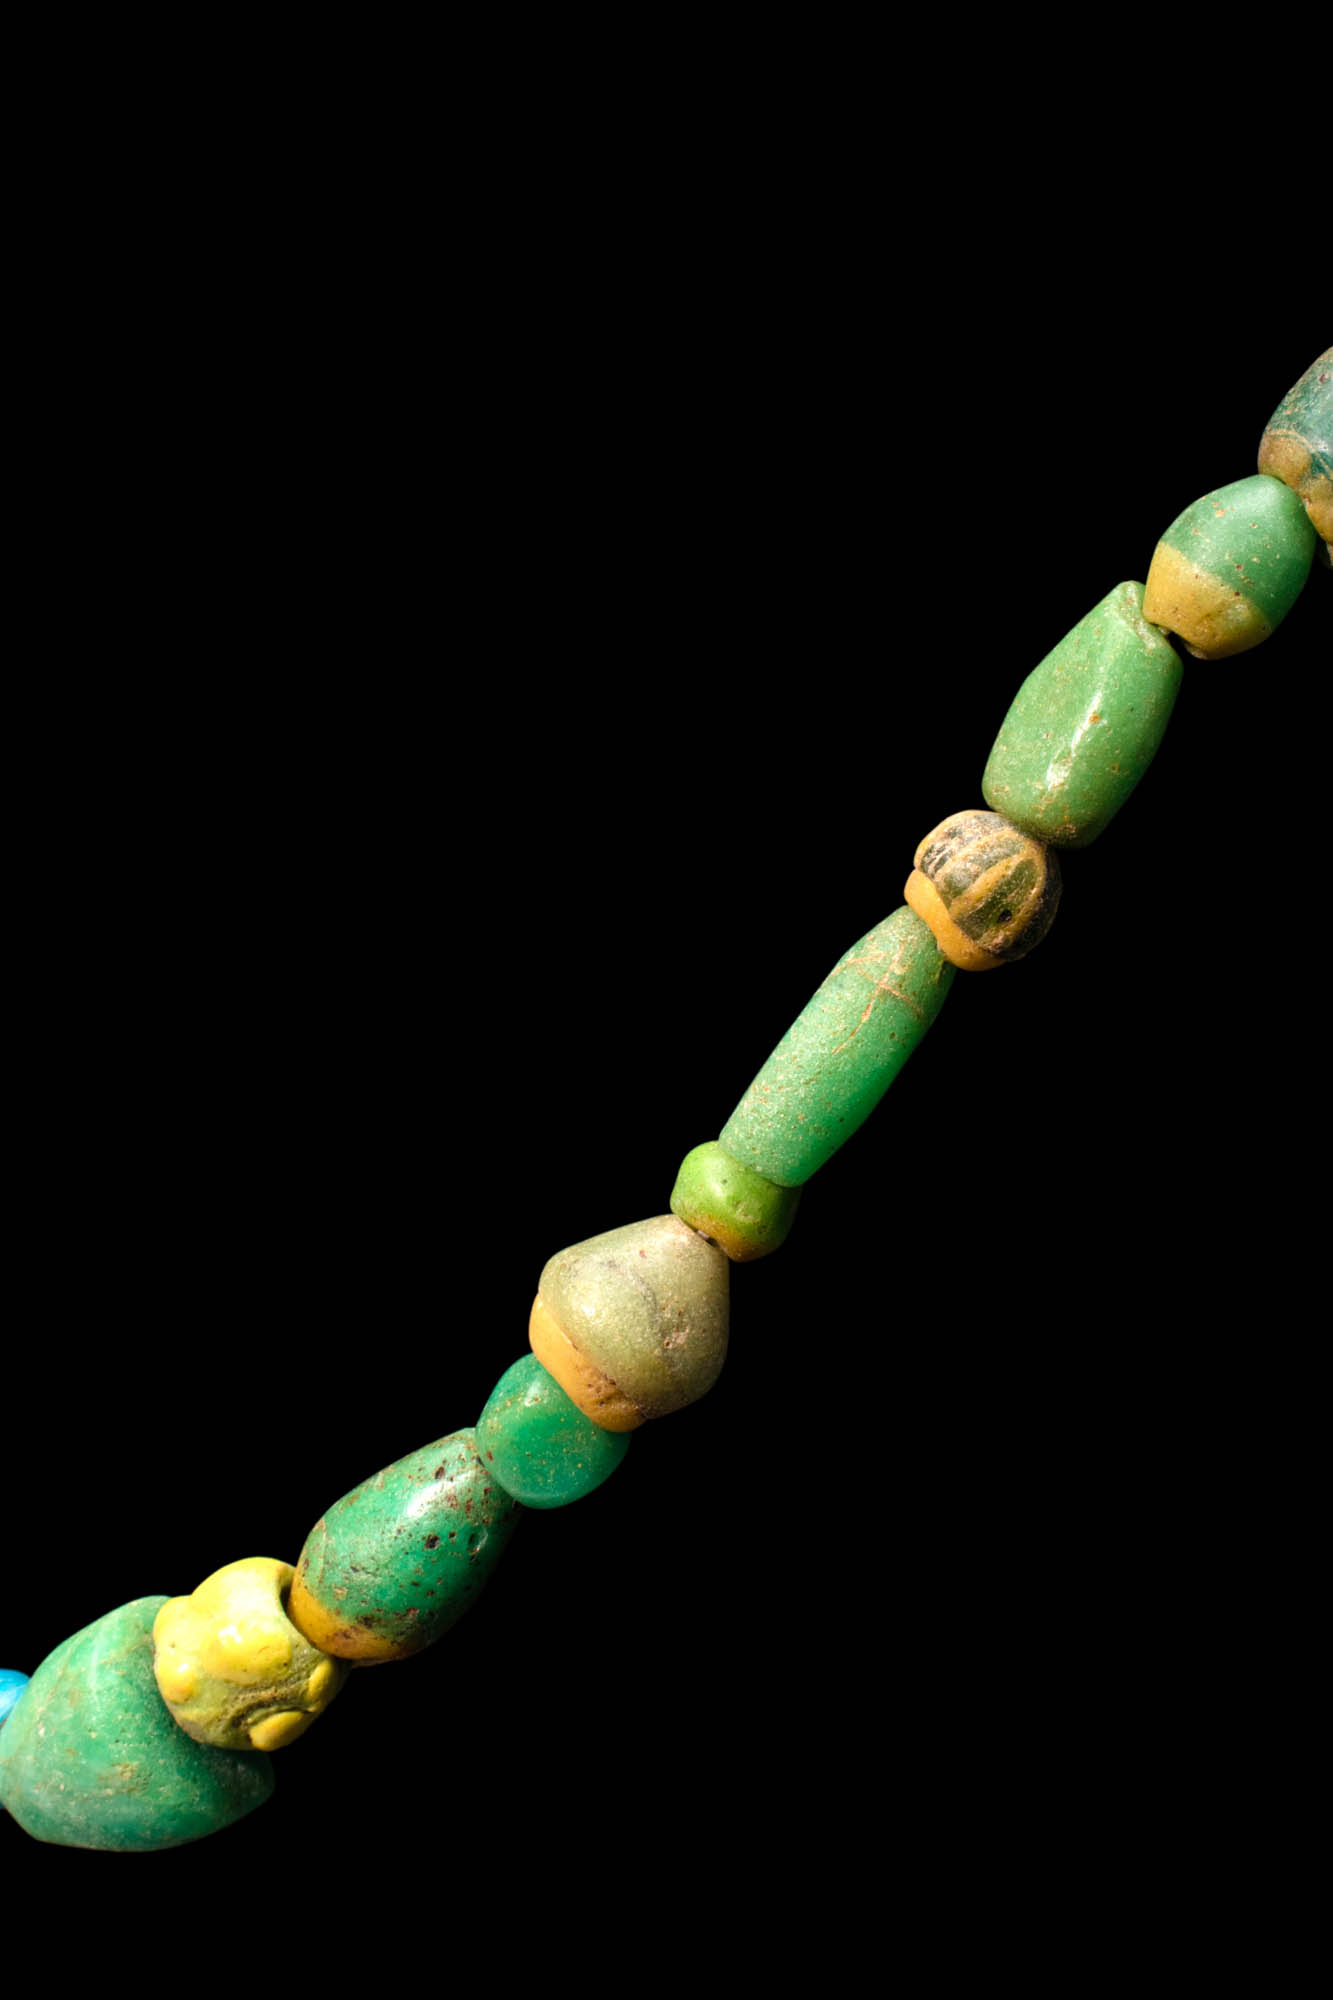 PHOENICIAN GLASS BEADS NECKLACE - Image 3 of 5